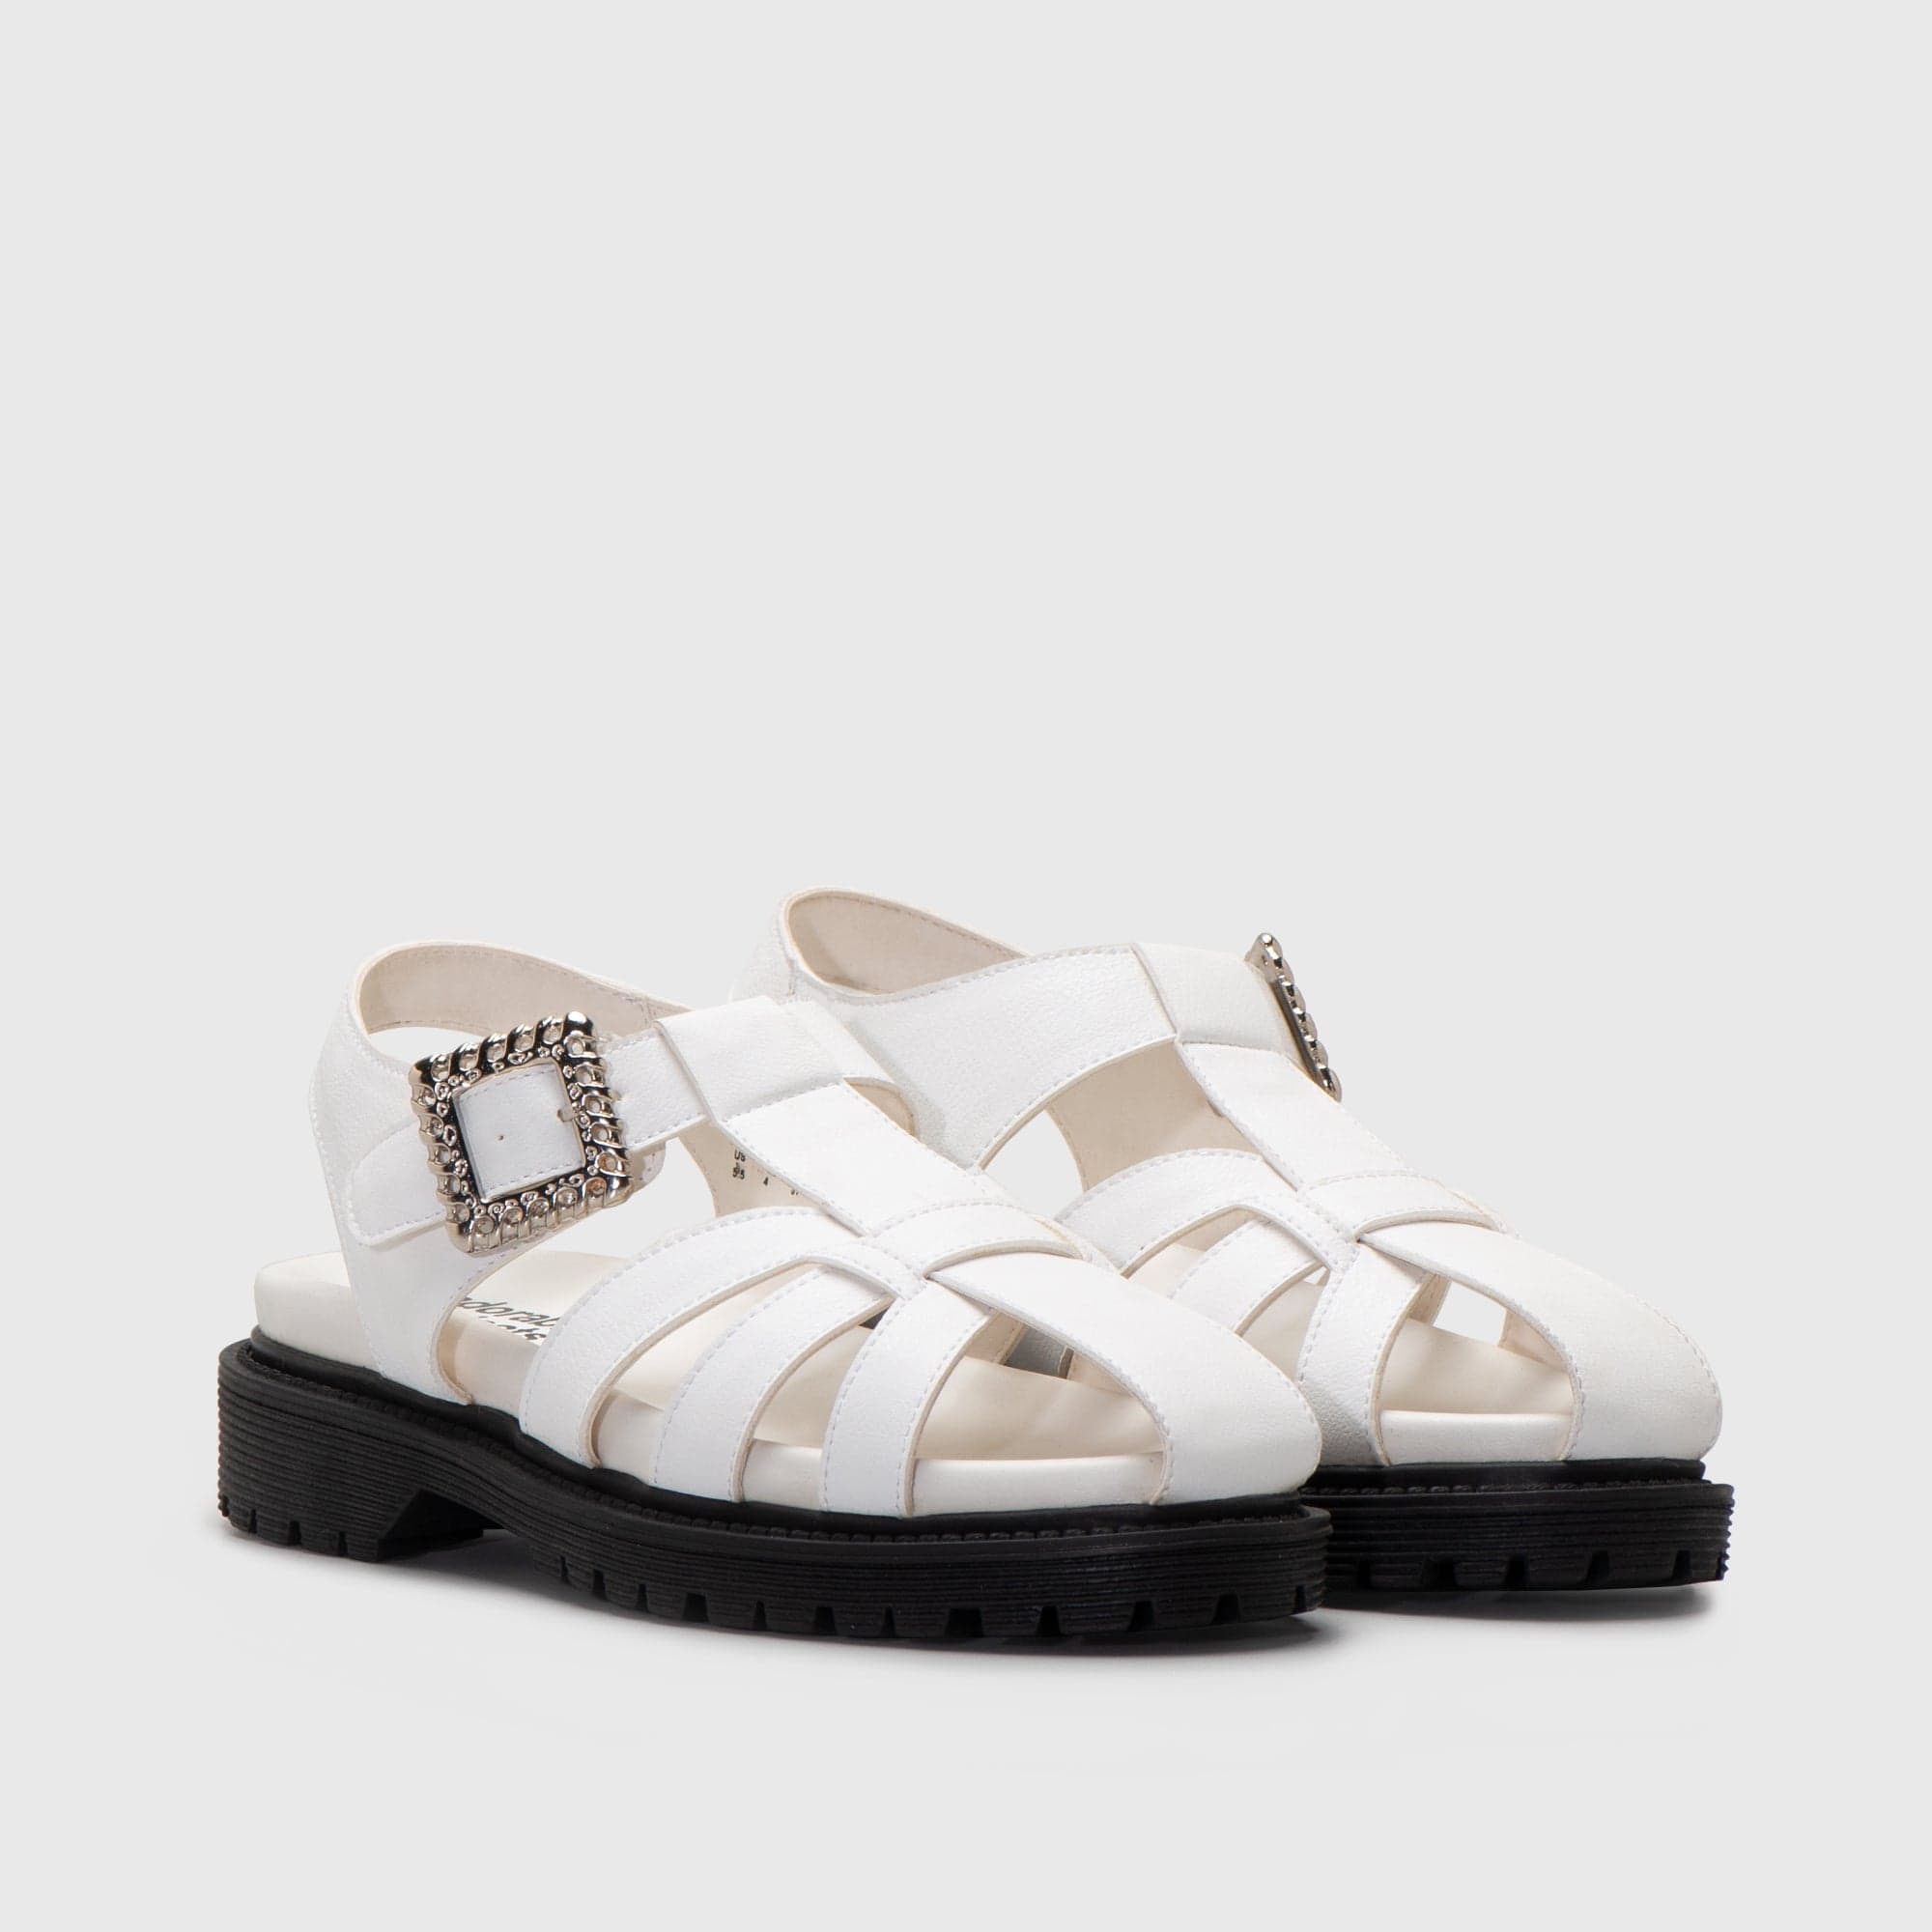 Adorable Projects Official Sandals 37 / White Hanza Sandals White